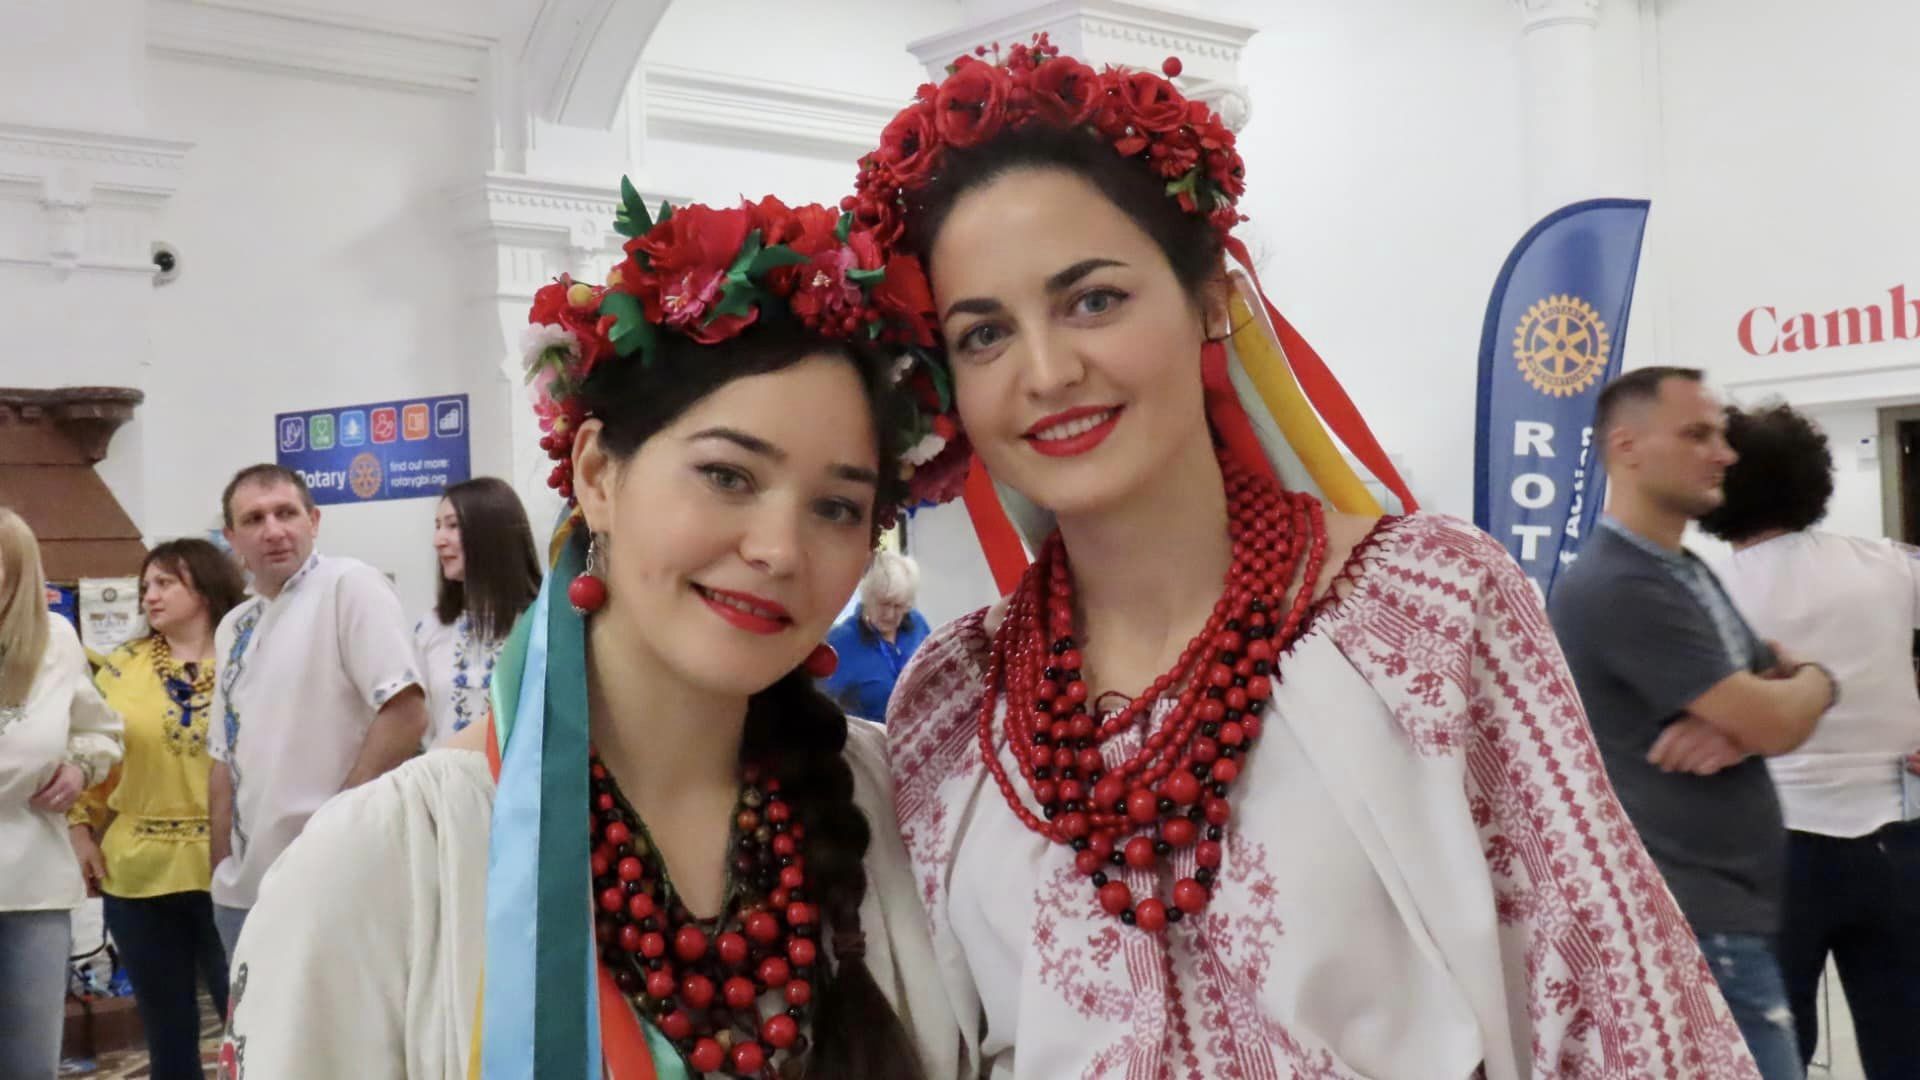 Visitors enjoyed the Ukrainian Day Celebrations at The Atkinson in Southport. Nina Karetska (left) and Vita Mahlovana (right). Photo by Andrew Brown Stand Up For Southport